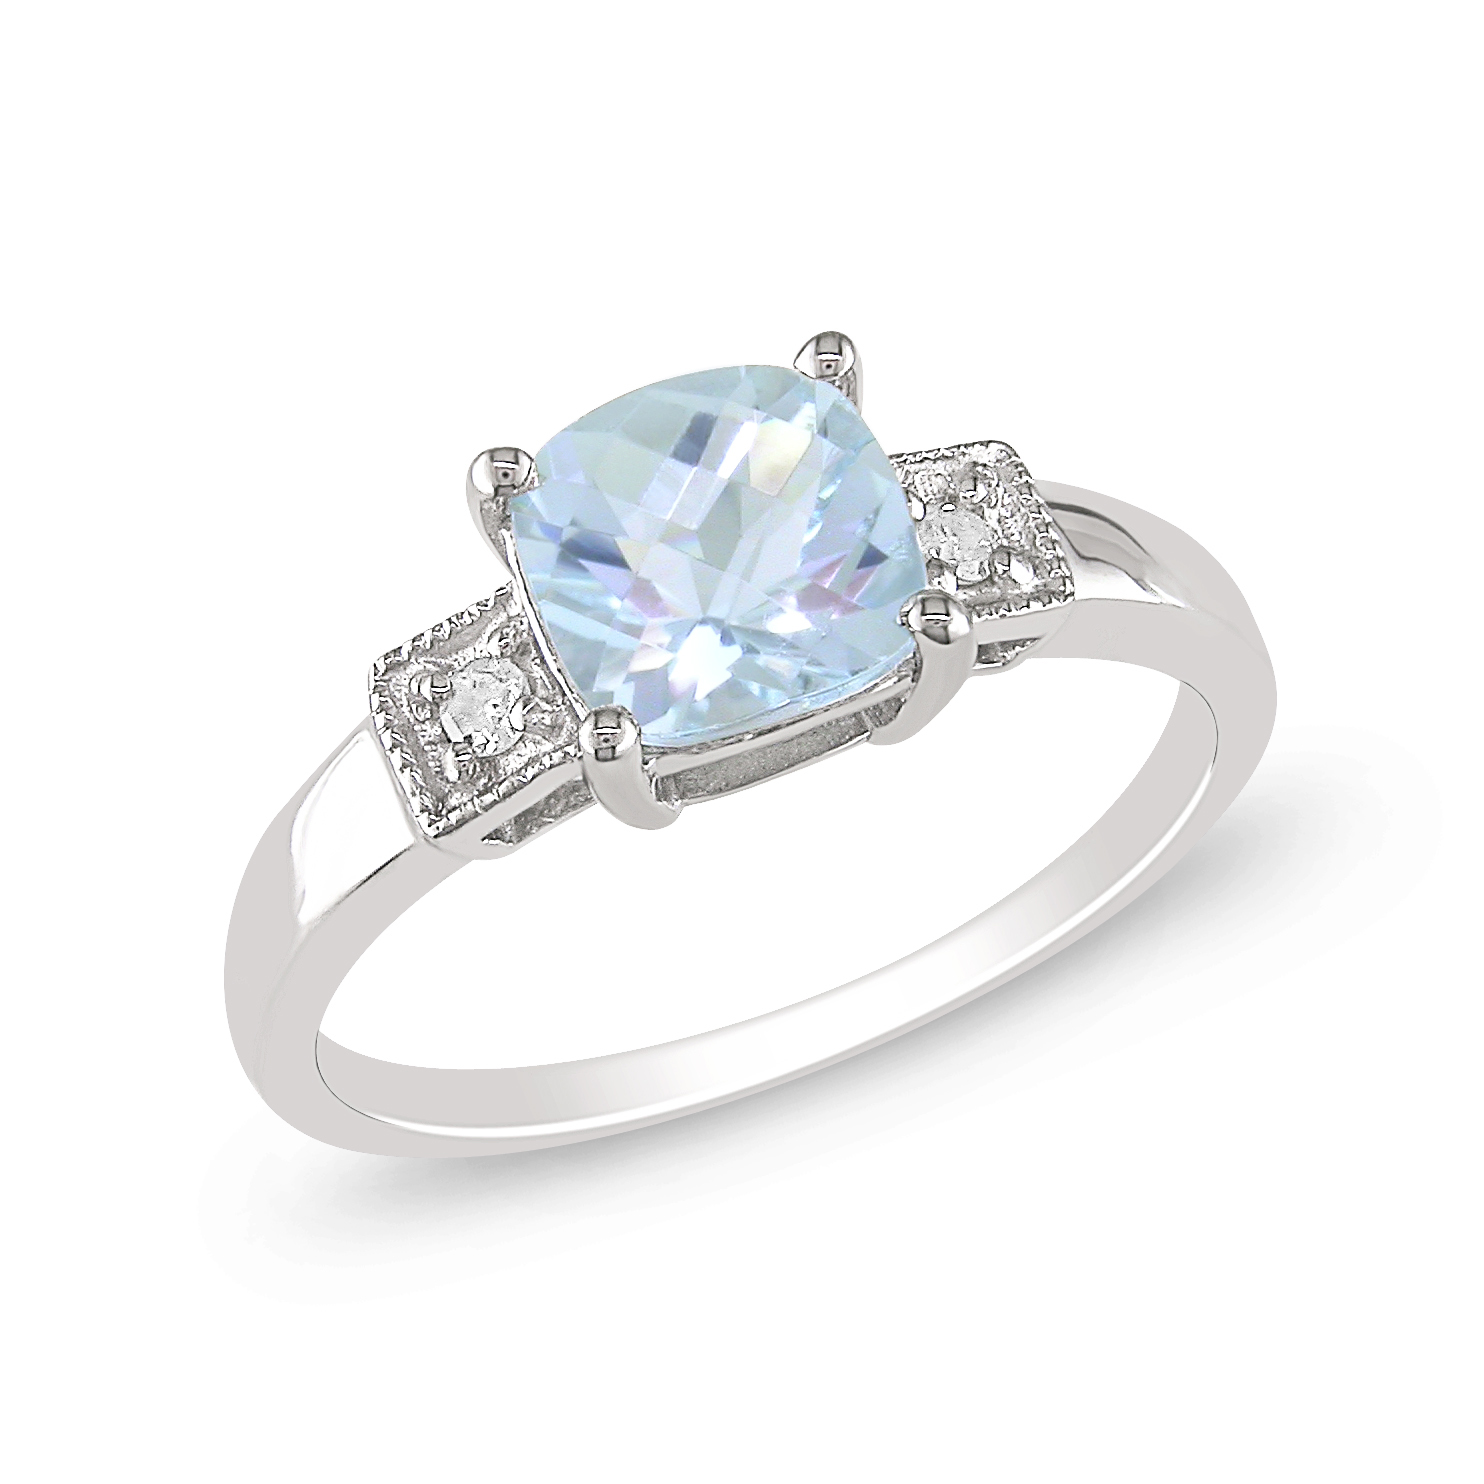 Amour 0.04 Carat T.W. Diamond and 4/5 Carat T.G.W. Aquamarine Fashion Ring in Sterling Silver I3